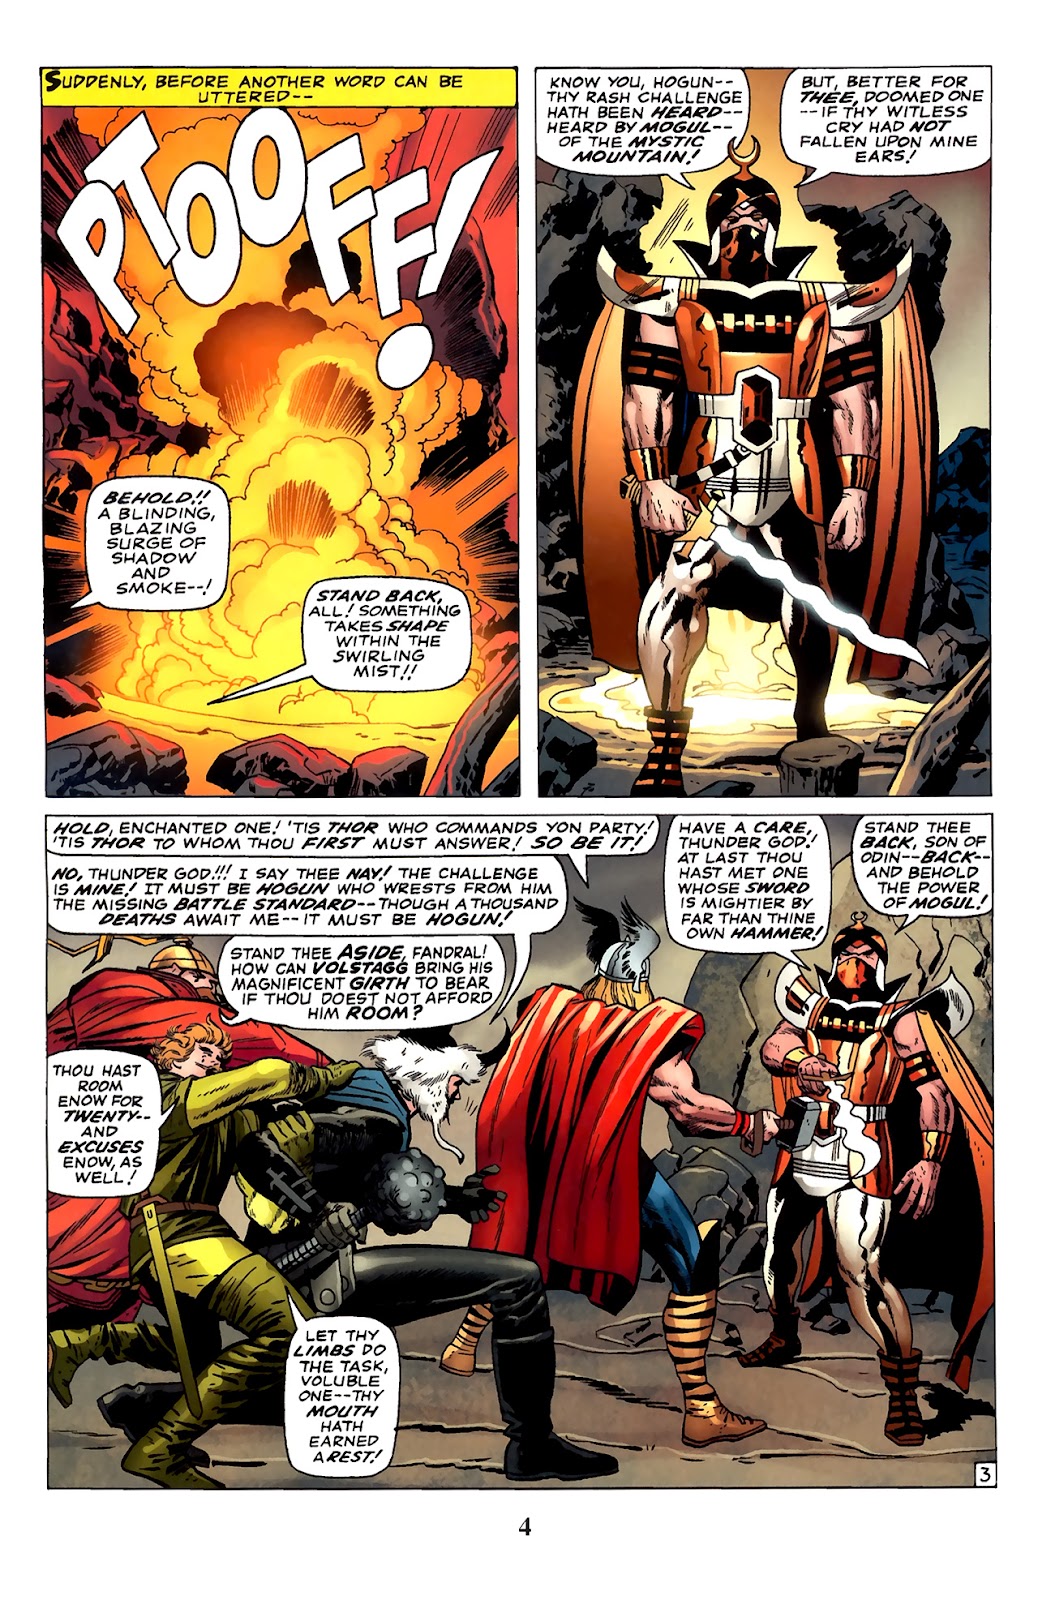 Thor: Tales of Asgard by Stan Lee & Jack Kirby issue 6 - Page 6